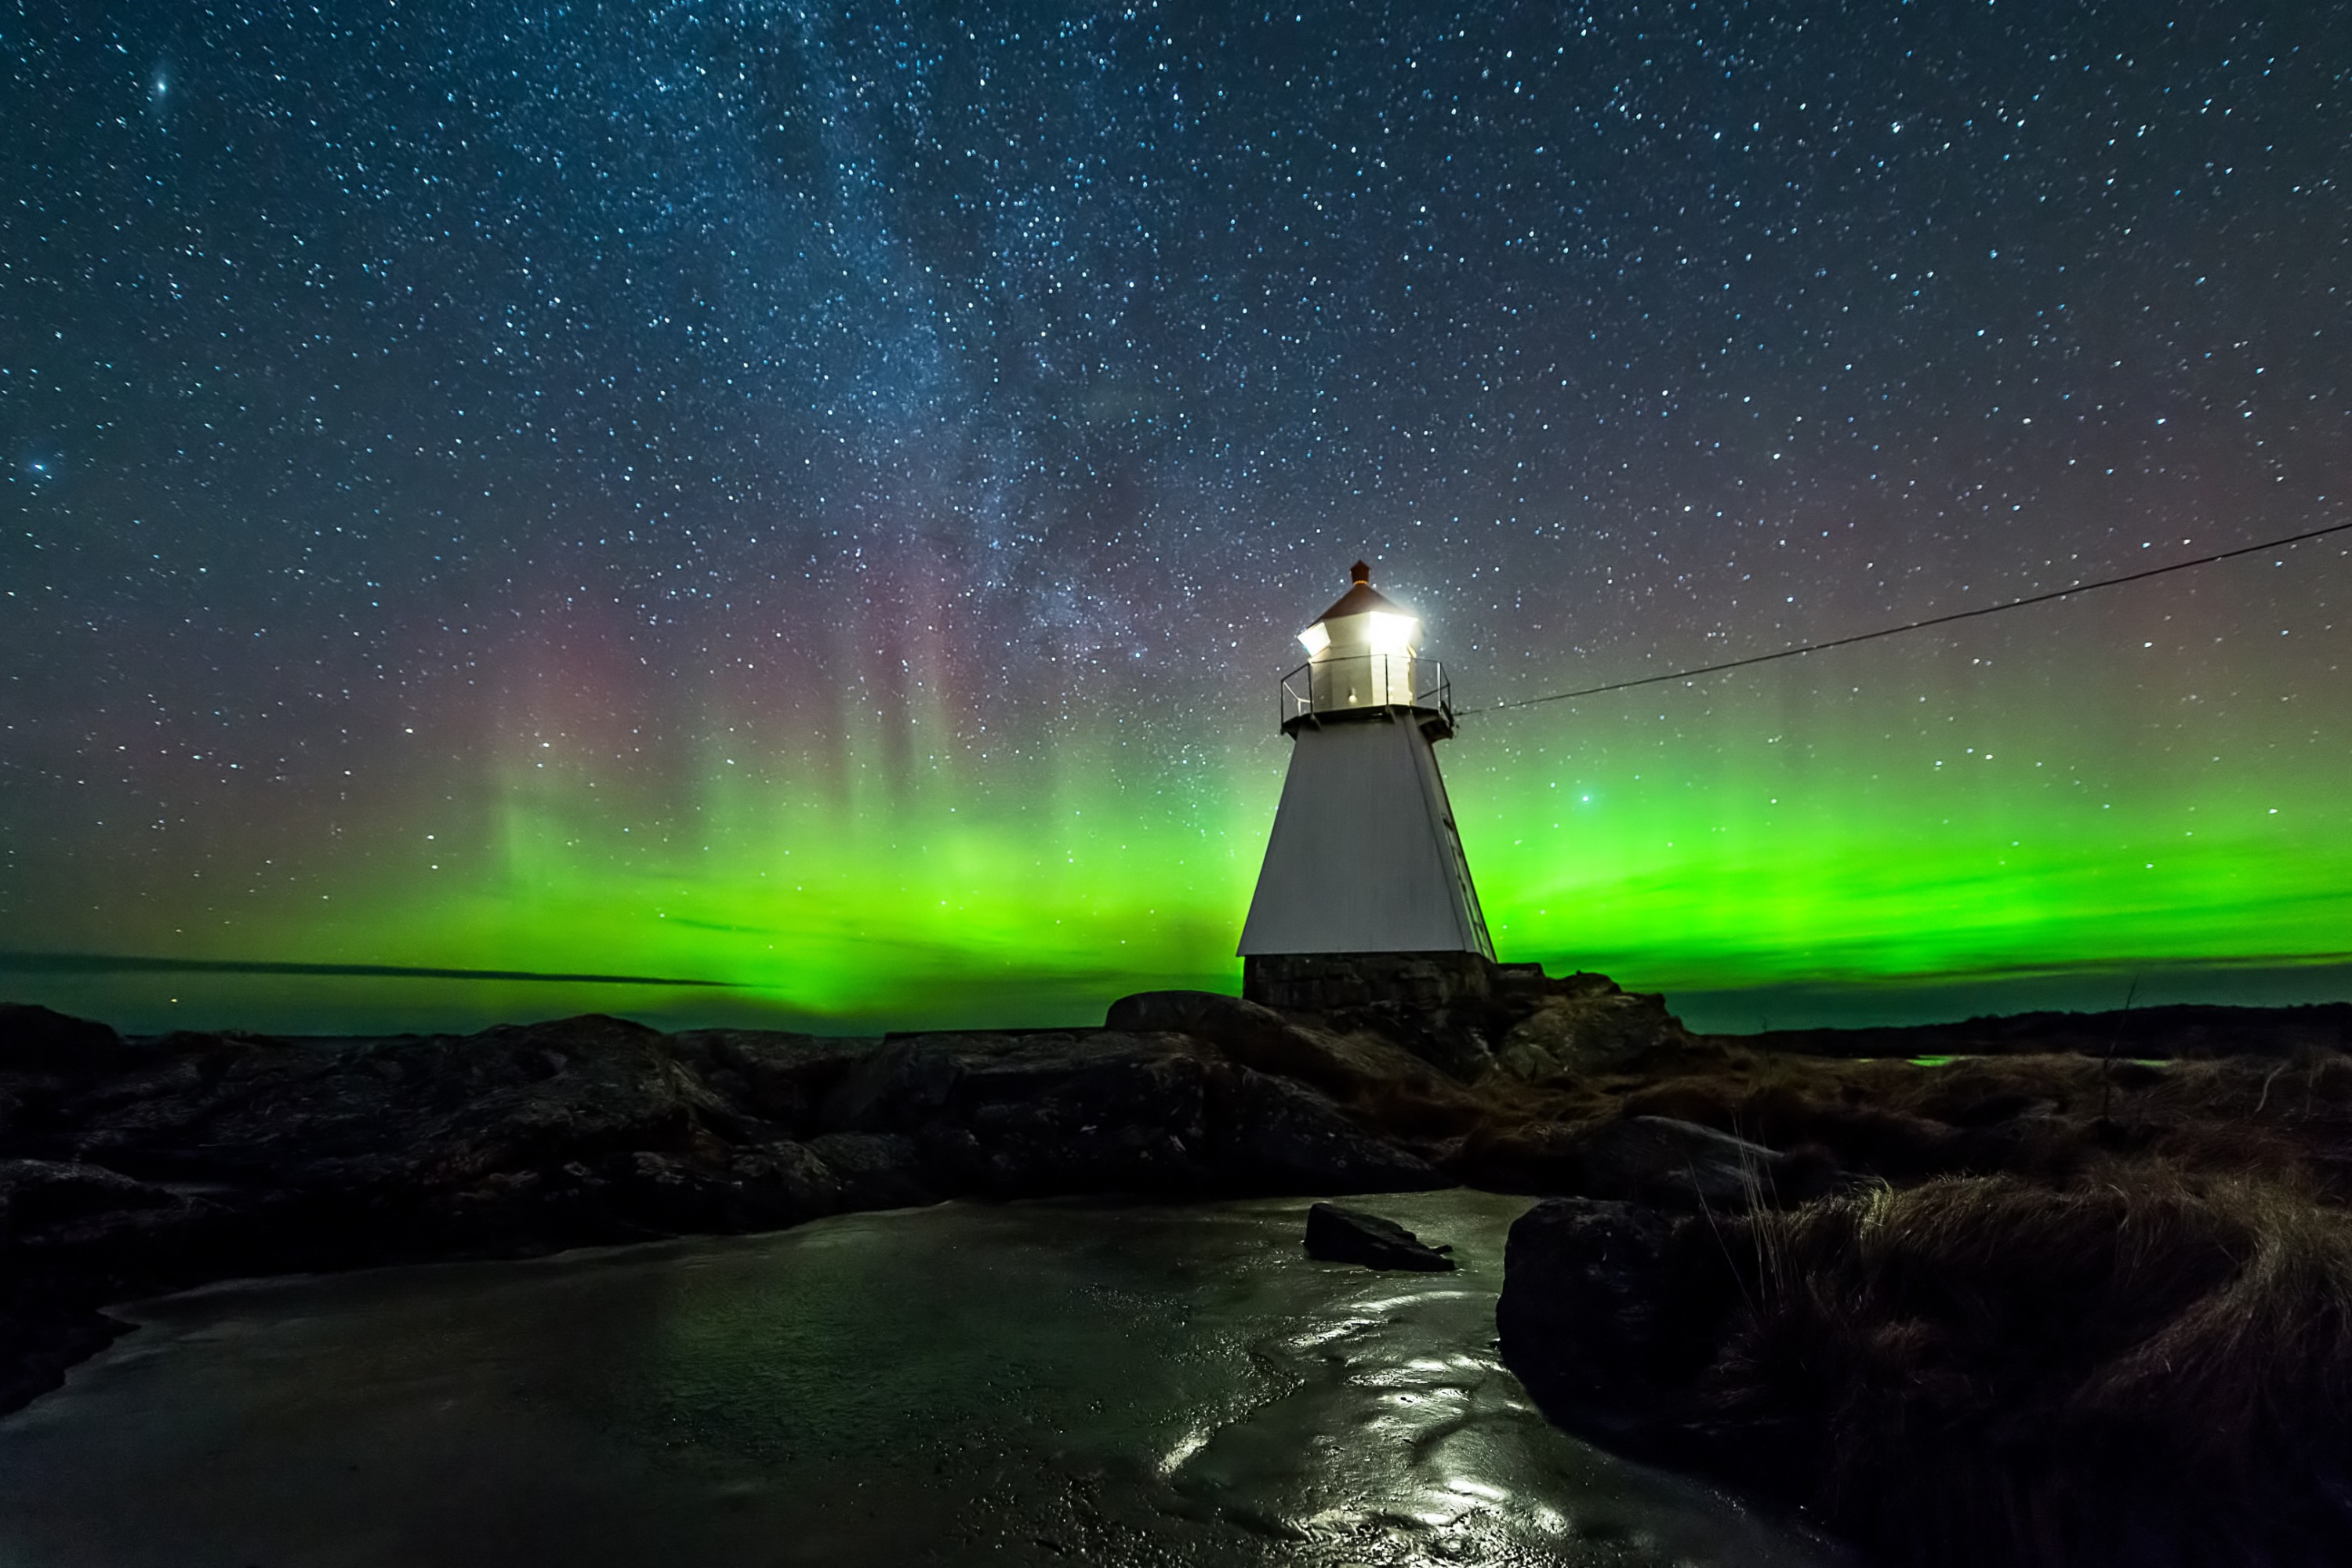 Watch The Northern Lights Come To Life In This Dramatic Timelapse